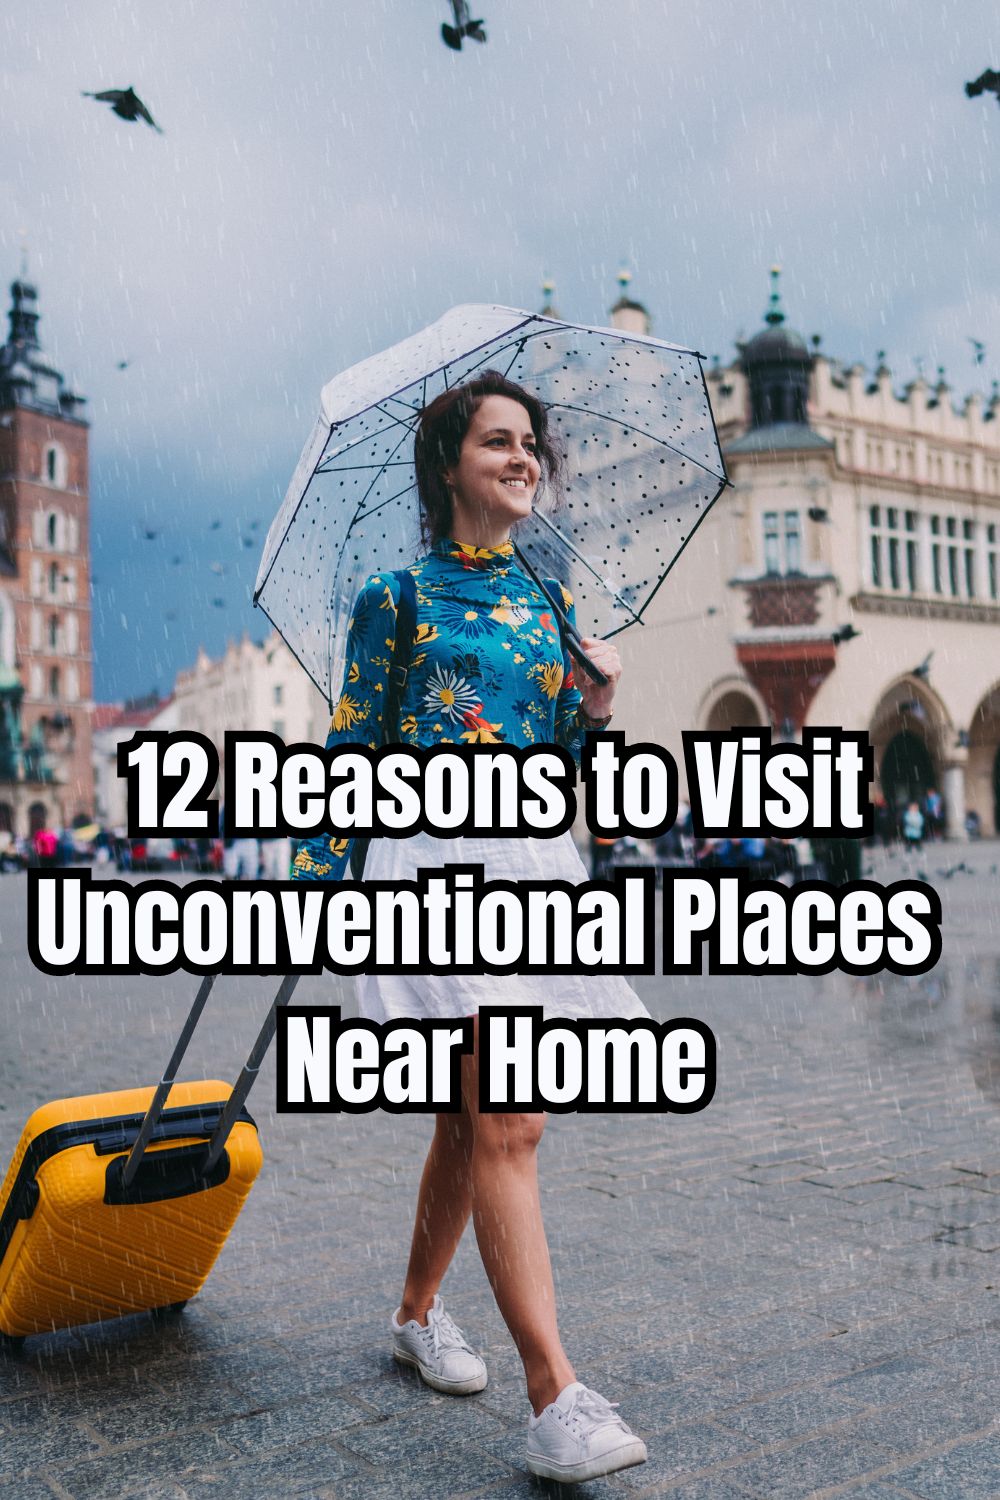 12 Reasons to Visit Unconventional Places Near Home 